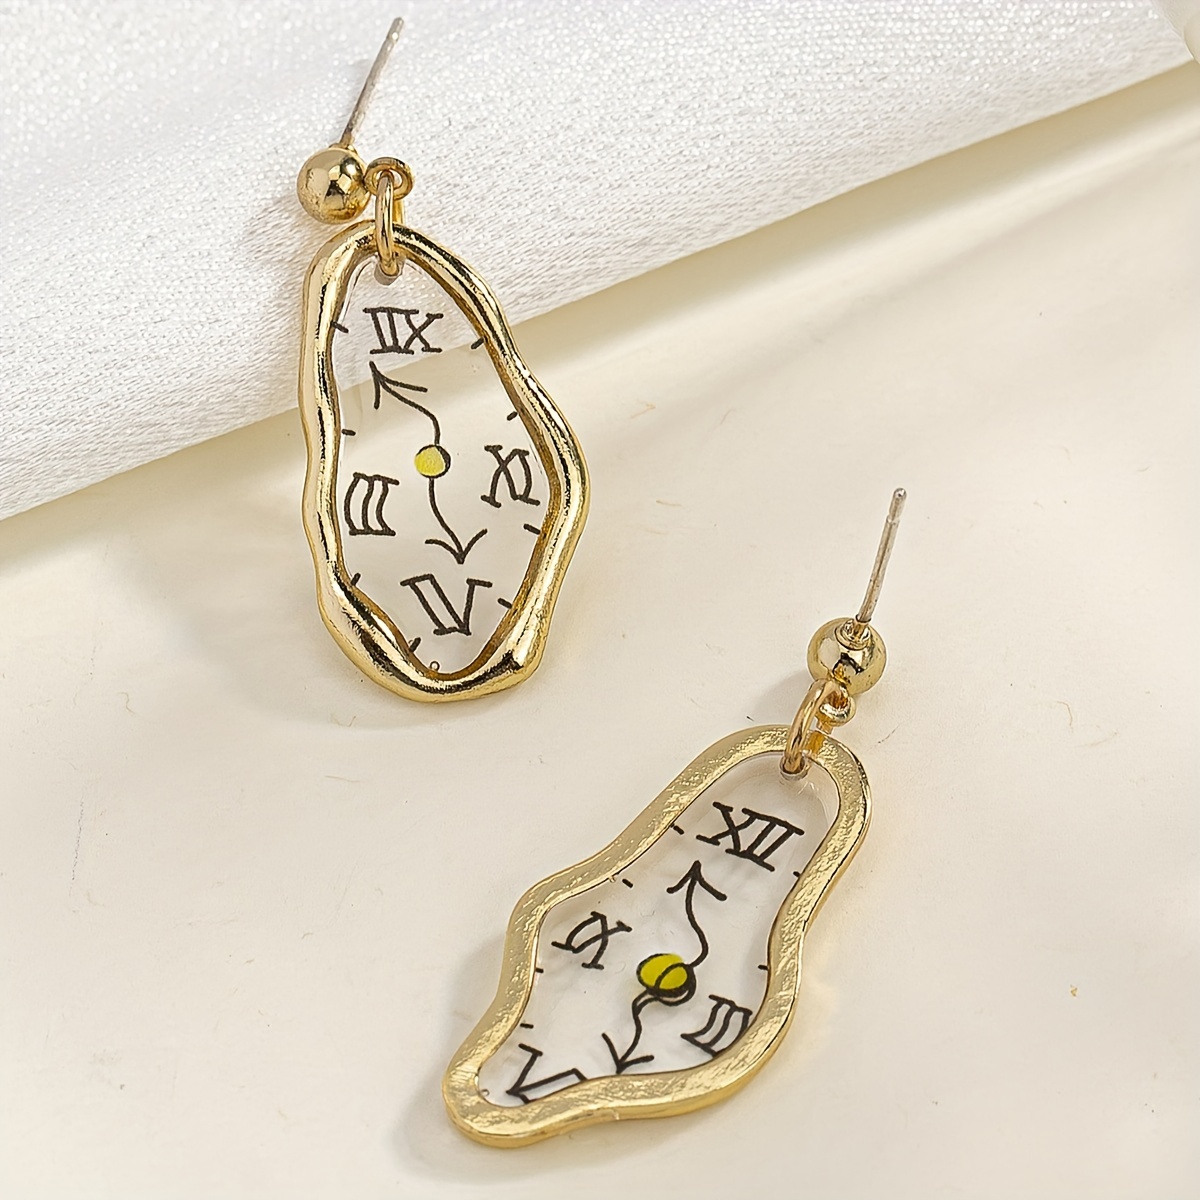 

Vintage Clock Design Transparent Earrings, Handcrafted Fashion Artistic Unique Chic Earrings, Perfect Gift For Ladies